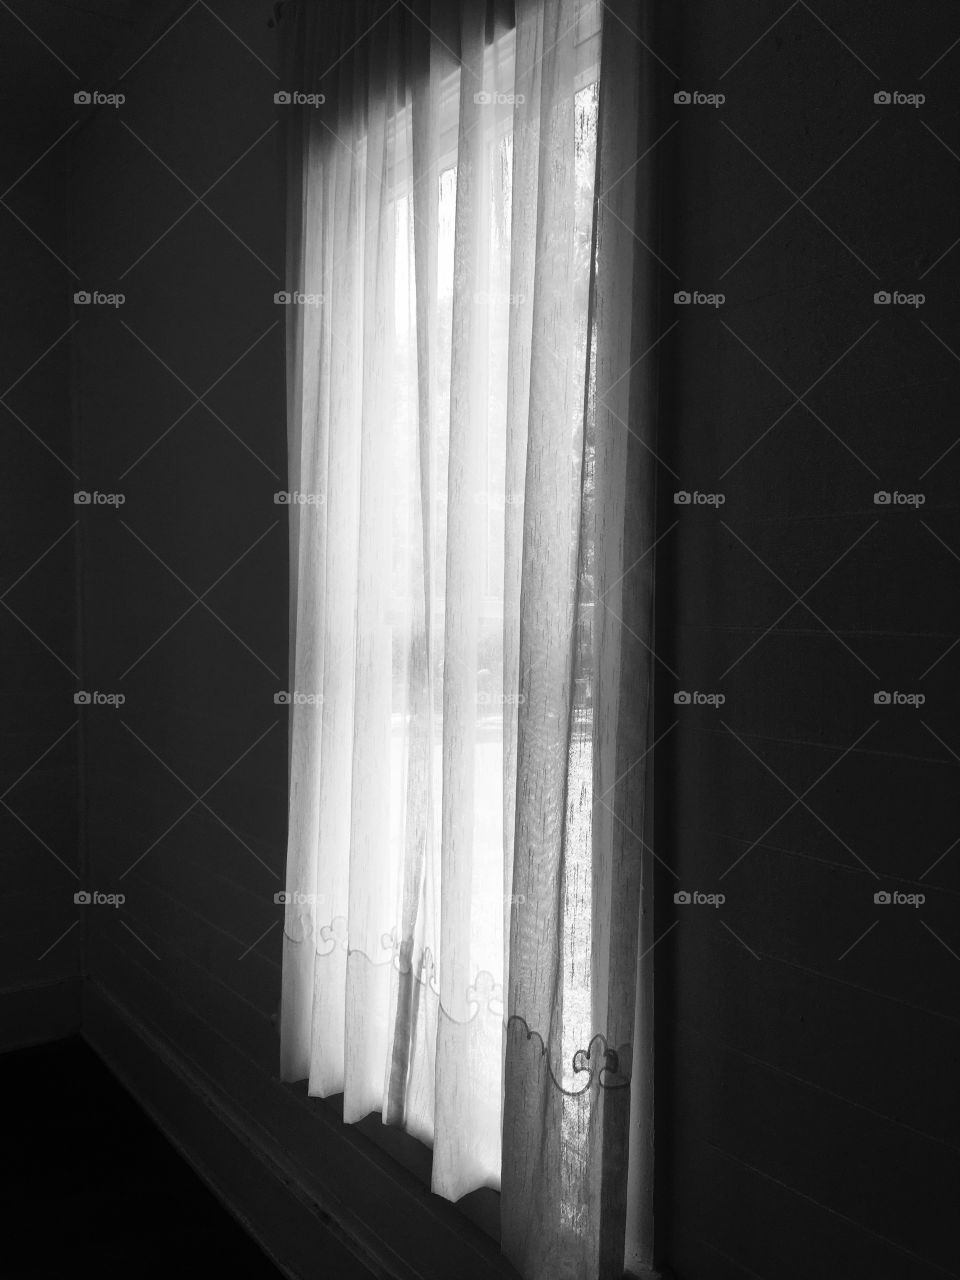 Curtain in black and white